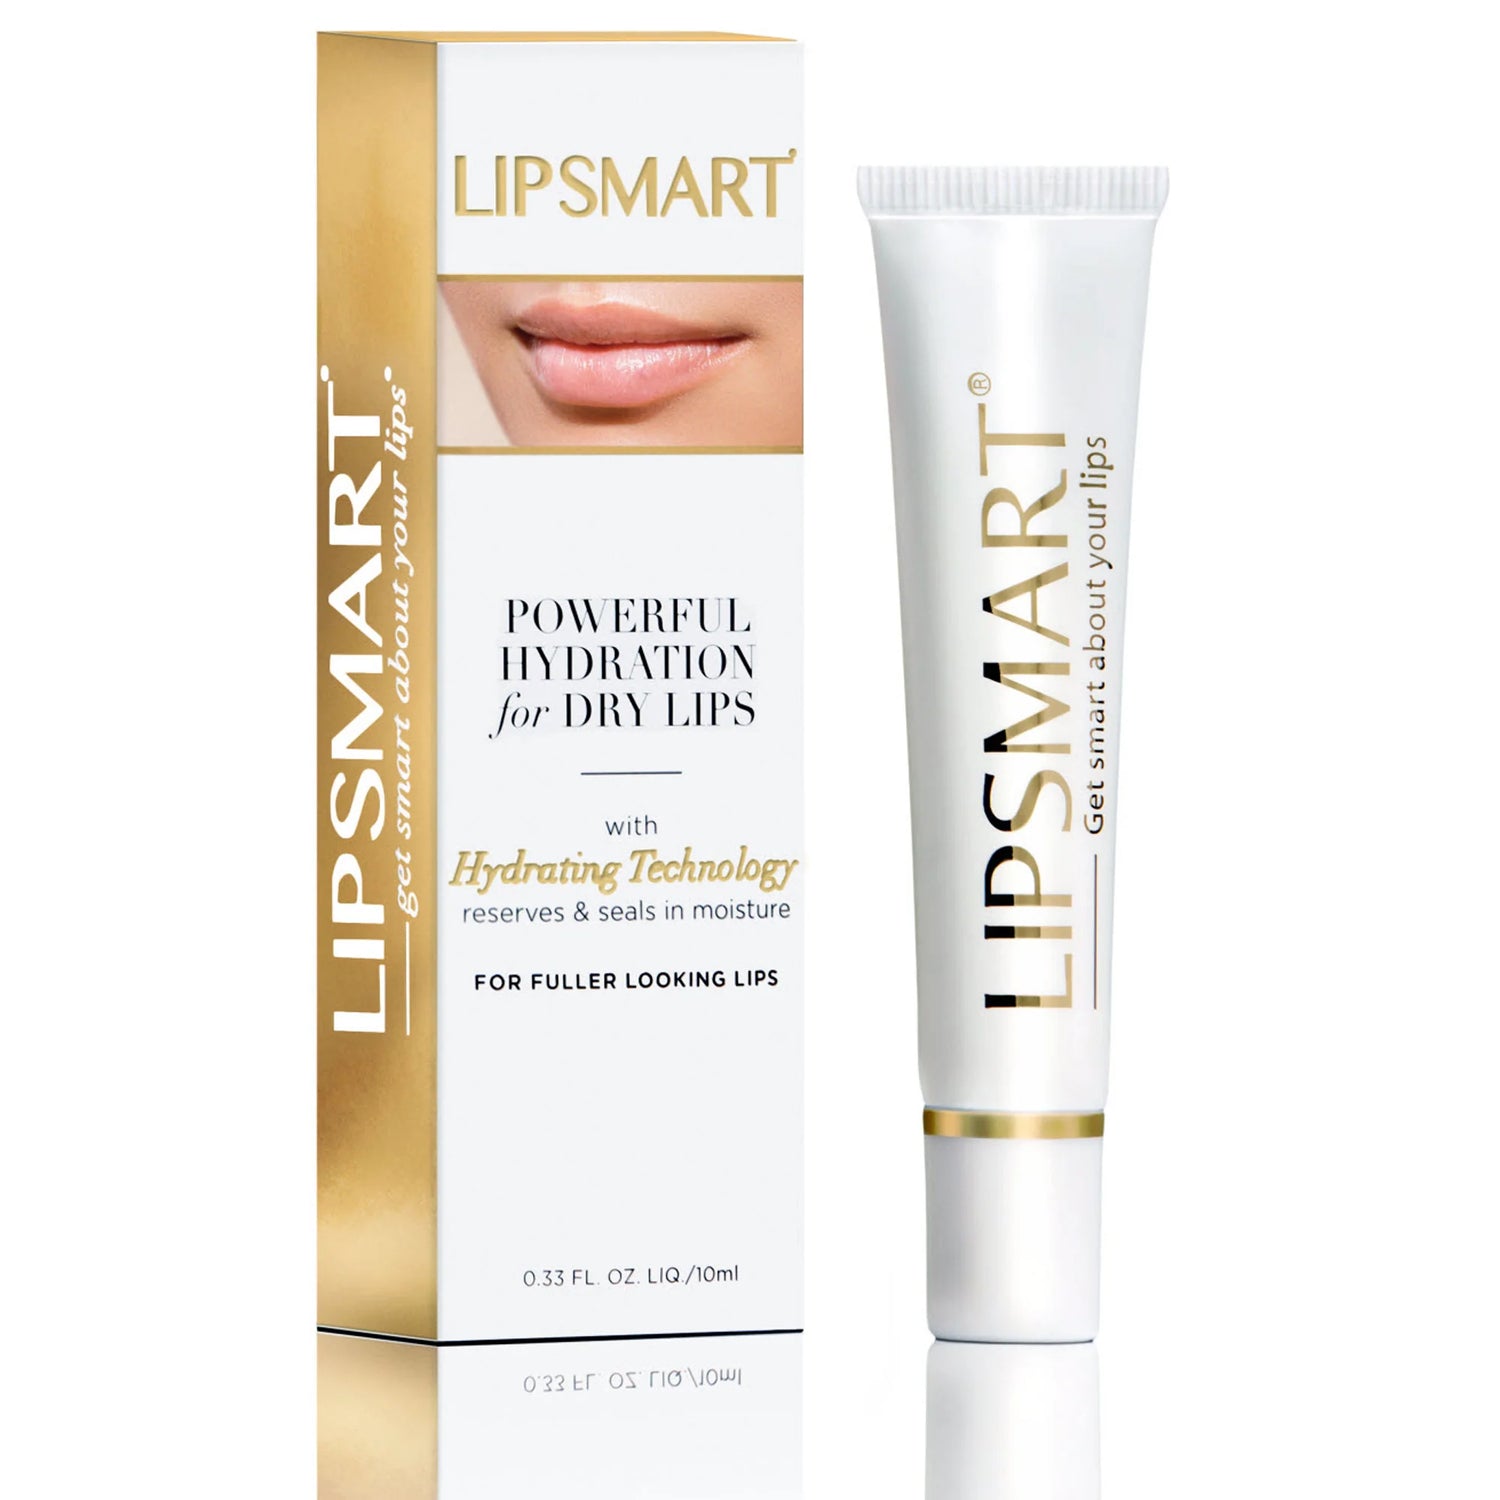 Lipsmart Powerful Hydration for Dry Lips 10 ml